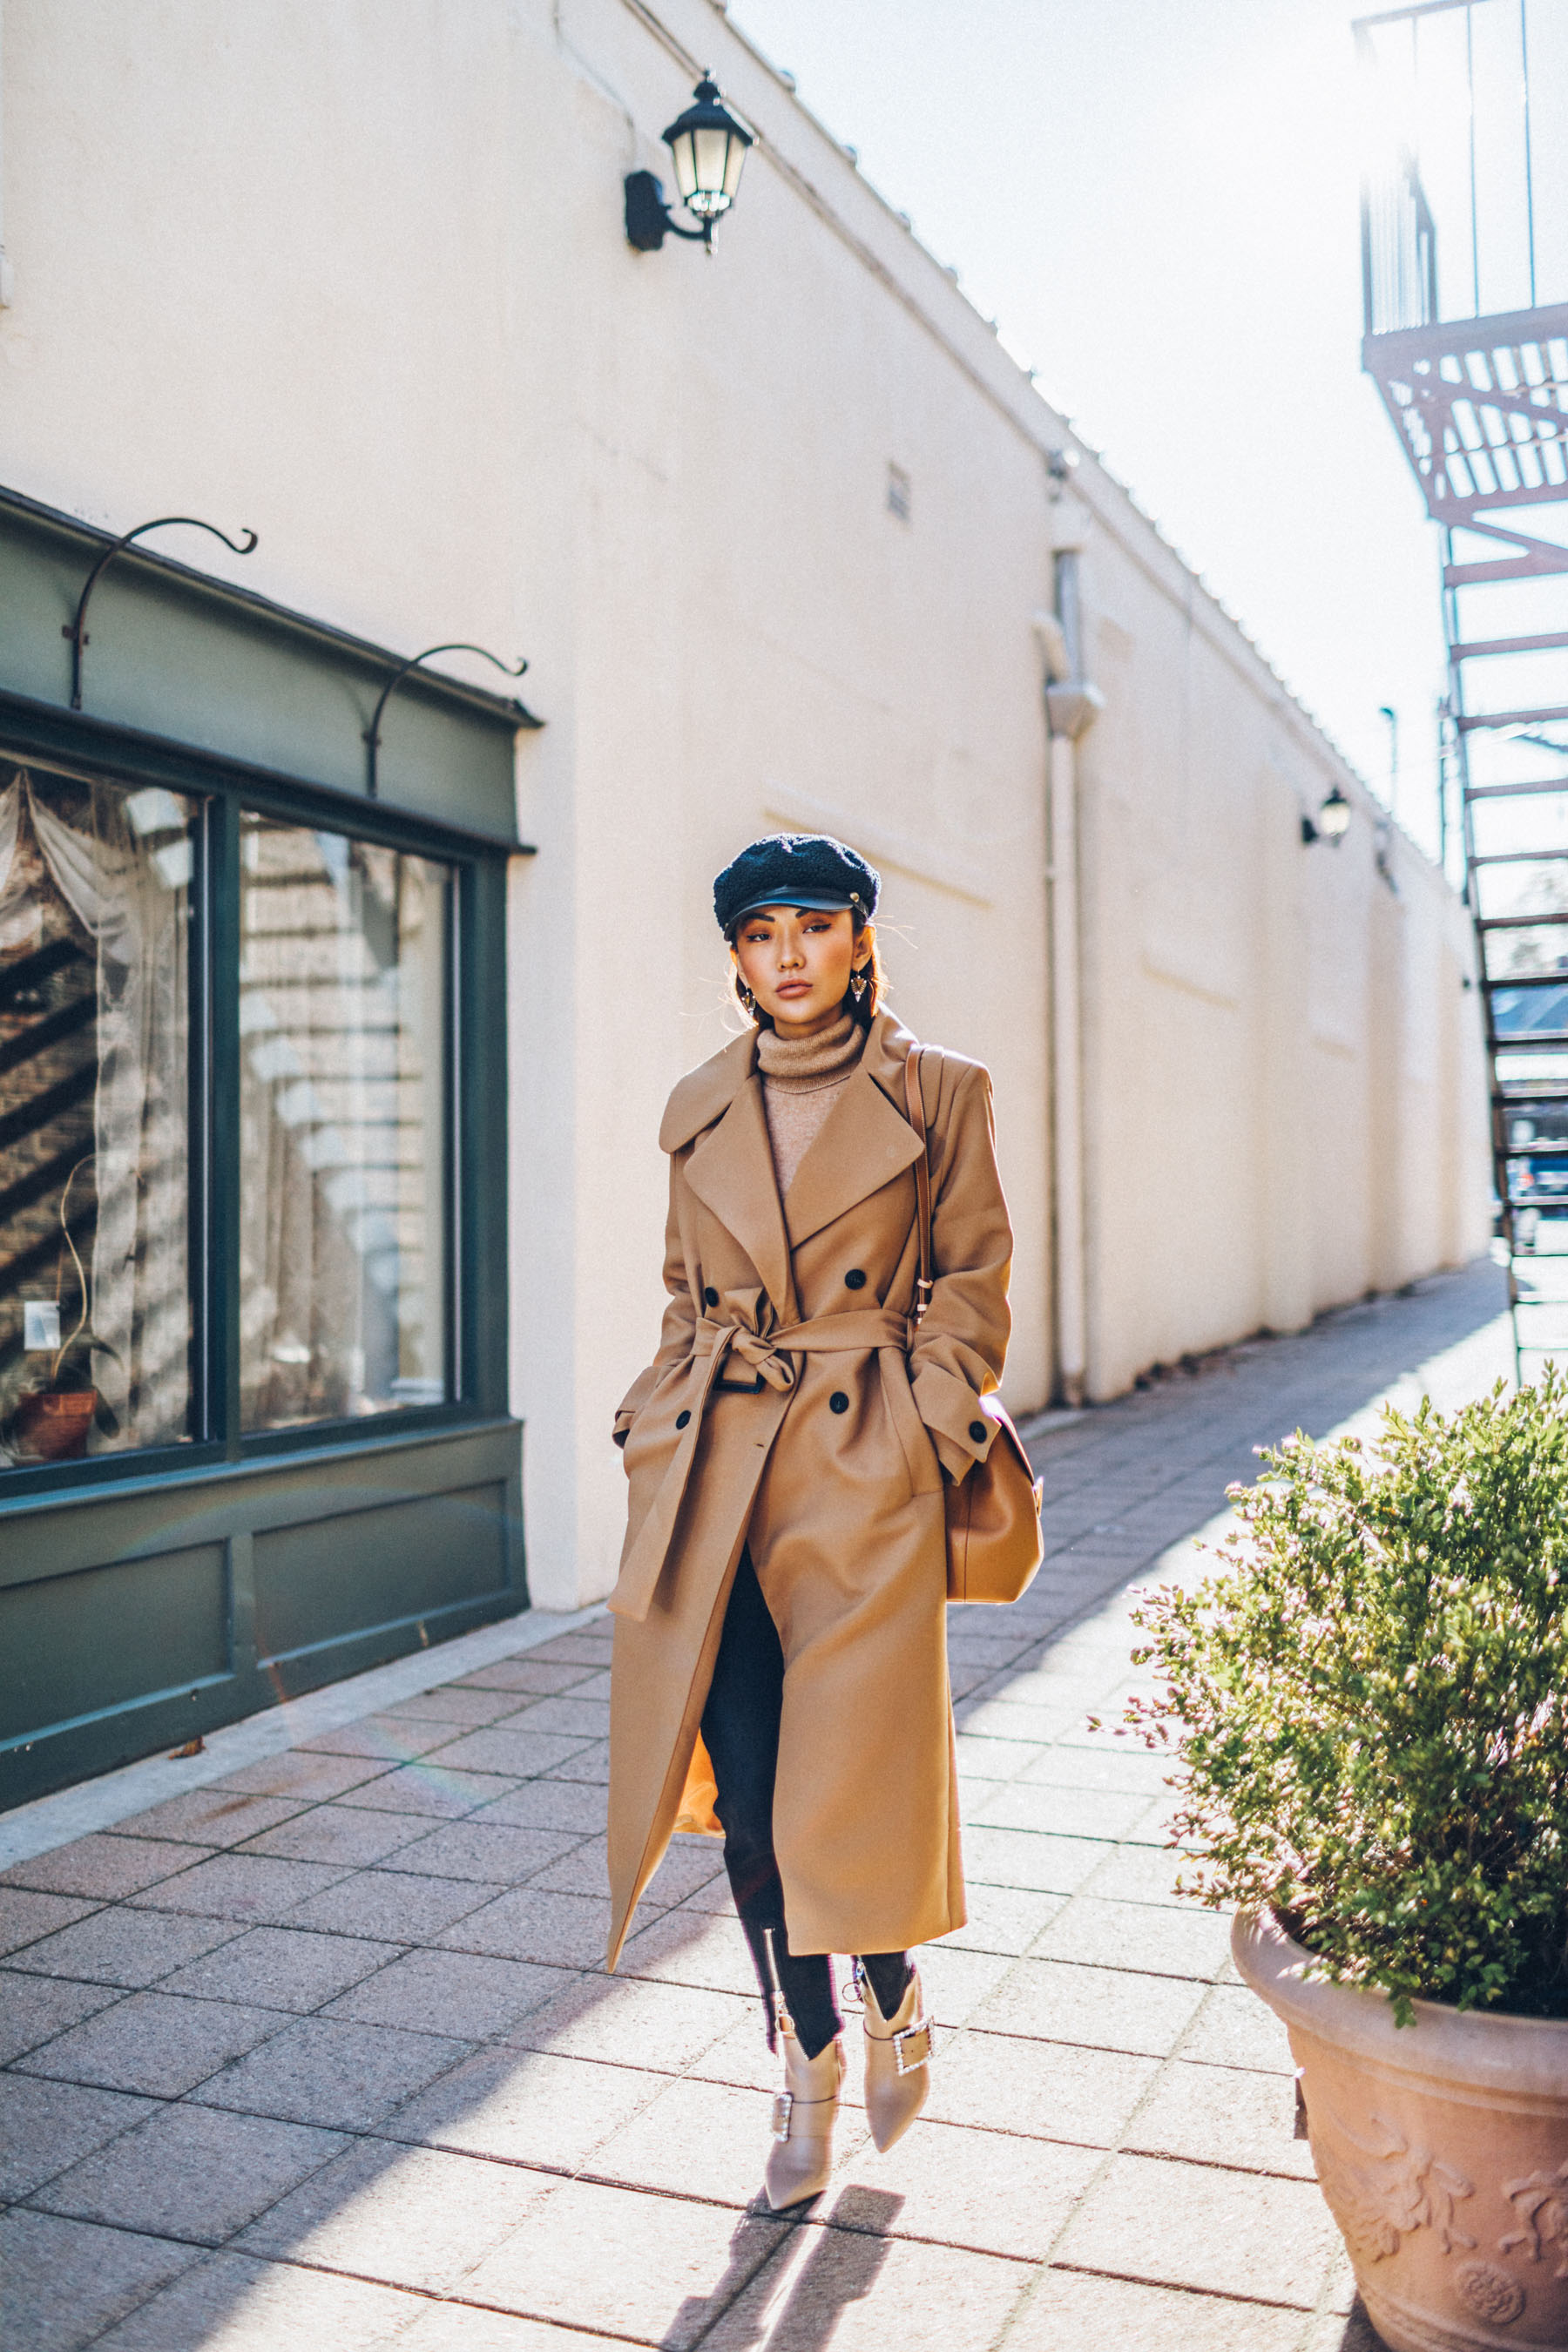 How to Buy an Investment Coat - Belted Camel Coat with Dark Denim Baker Boy Cap and Satchel // Notjessfashion.com // New York fashion blogger, asian blogger, classic camel coat, winter outfit, classic winter outfit, cozy layered outfut, nude boots, nude bag, baker boy hat, how to style camel coat, jessica wang, fashion blogger, street style, fashion blogger street style, oversized coat, duster coat, maxi coat